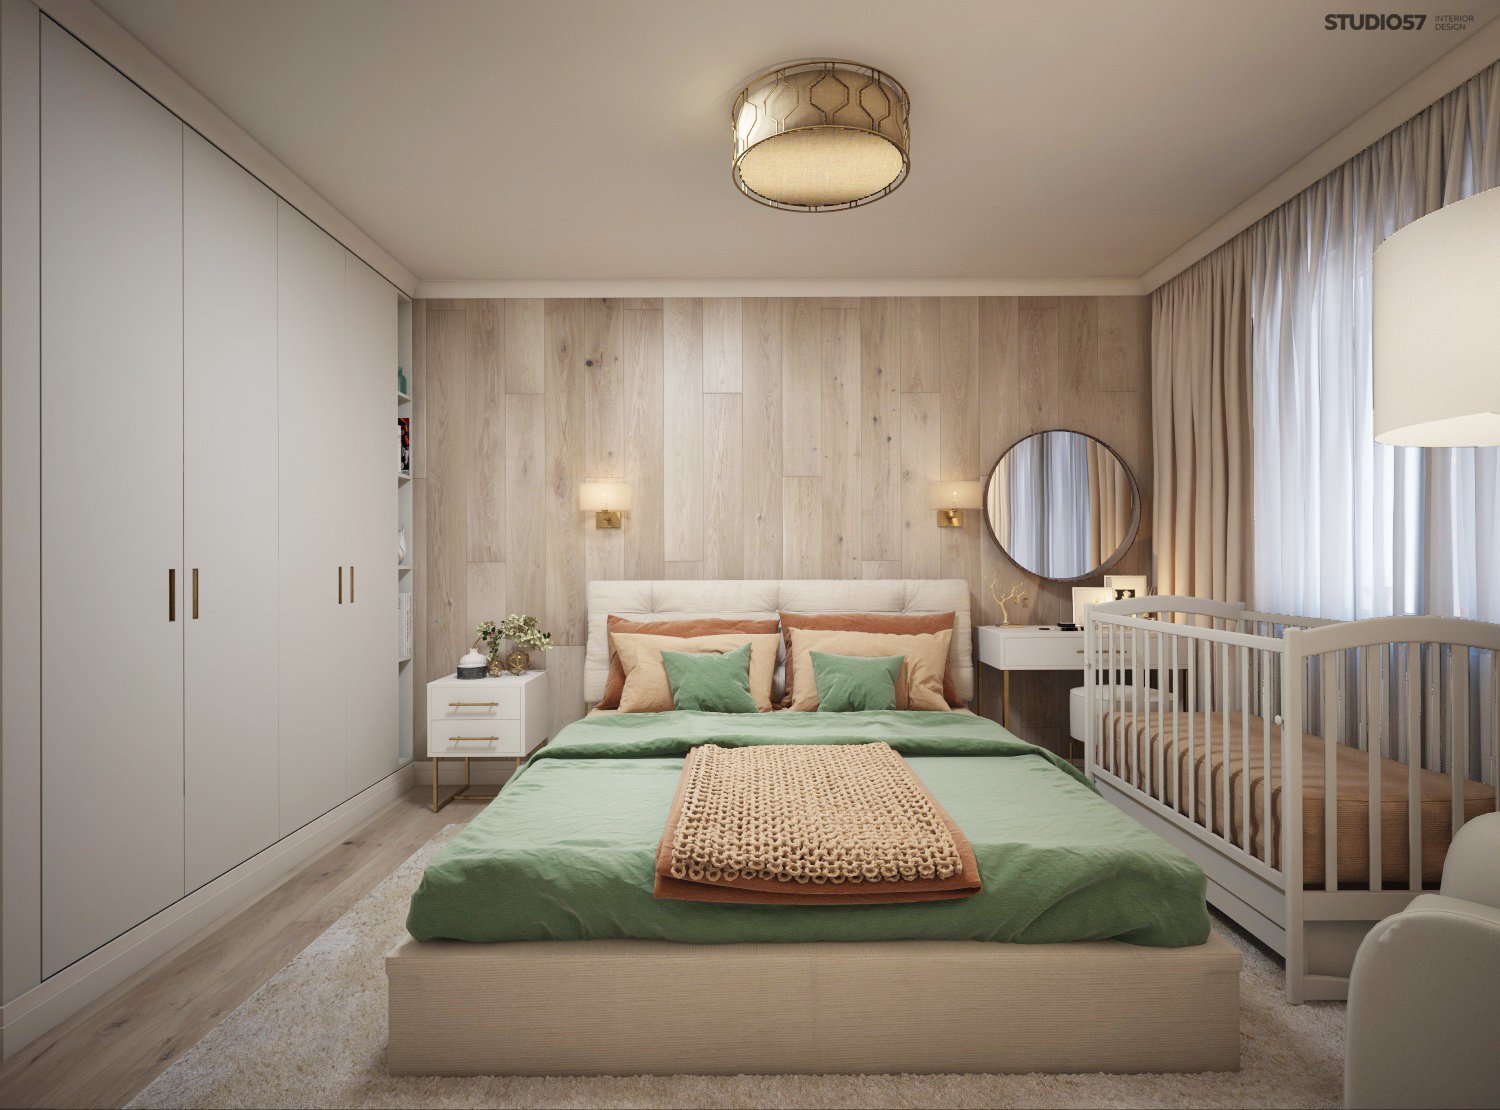 Bedroom with a wooden wall photo